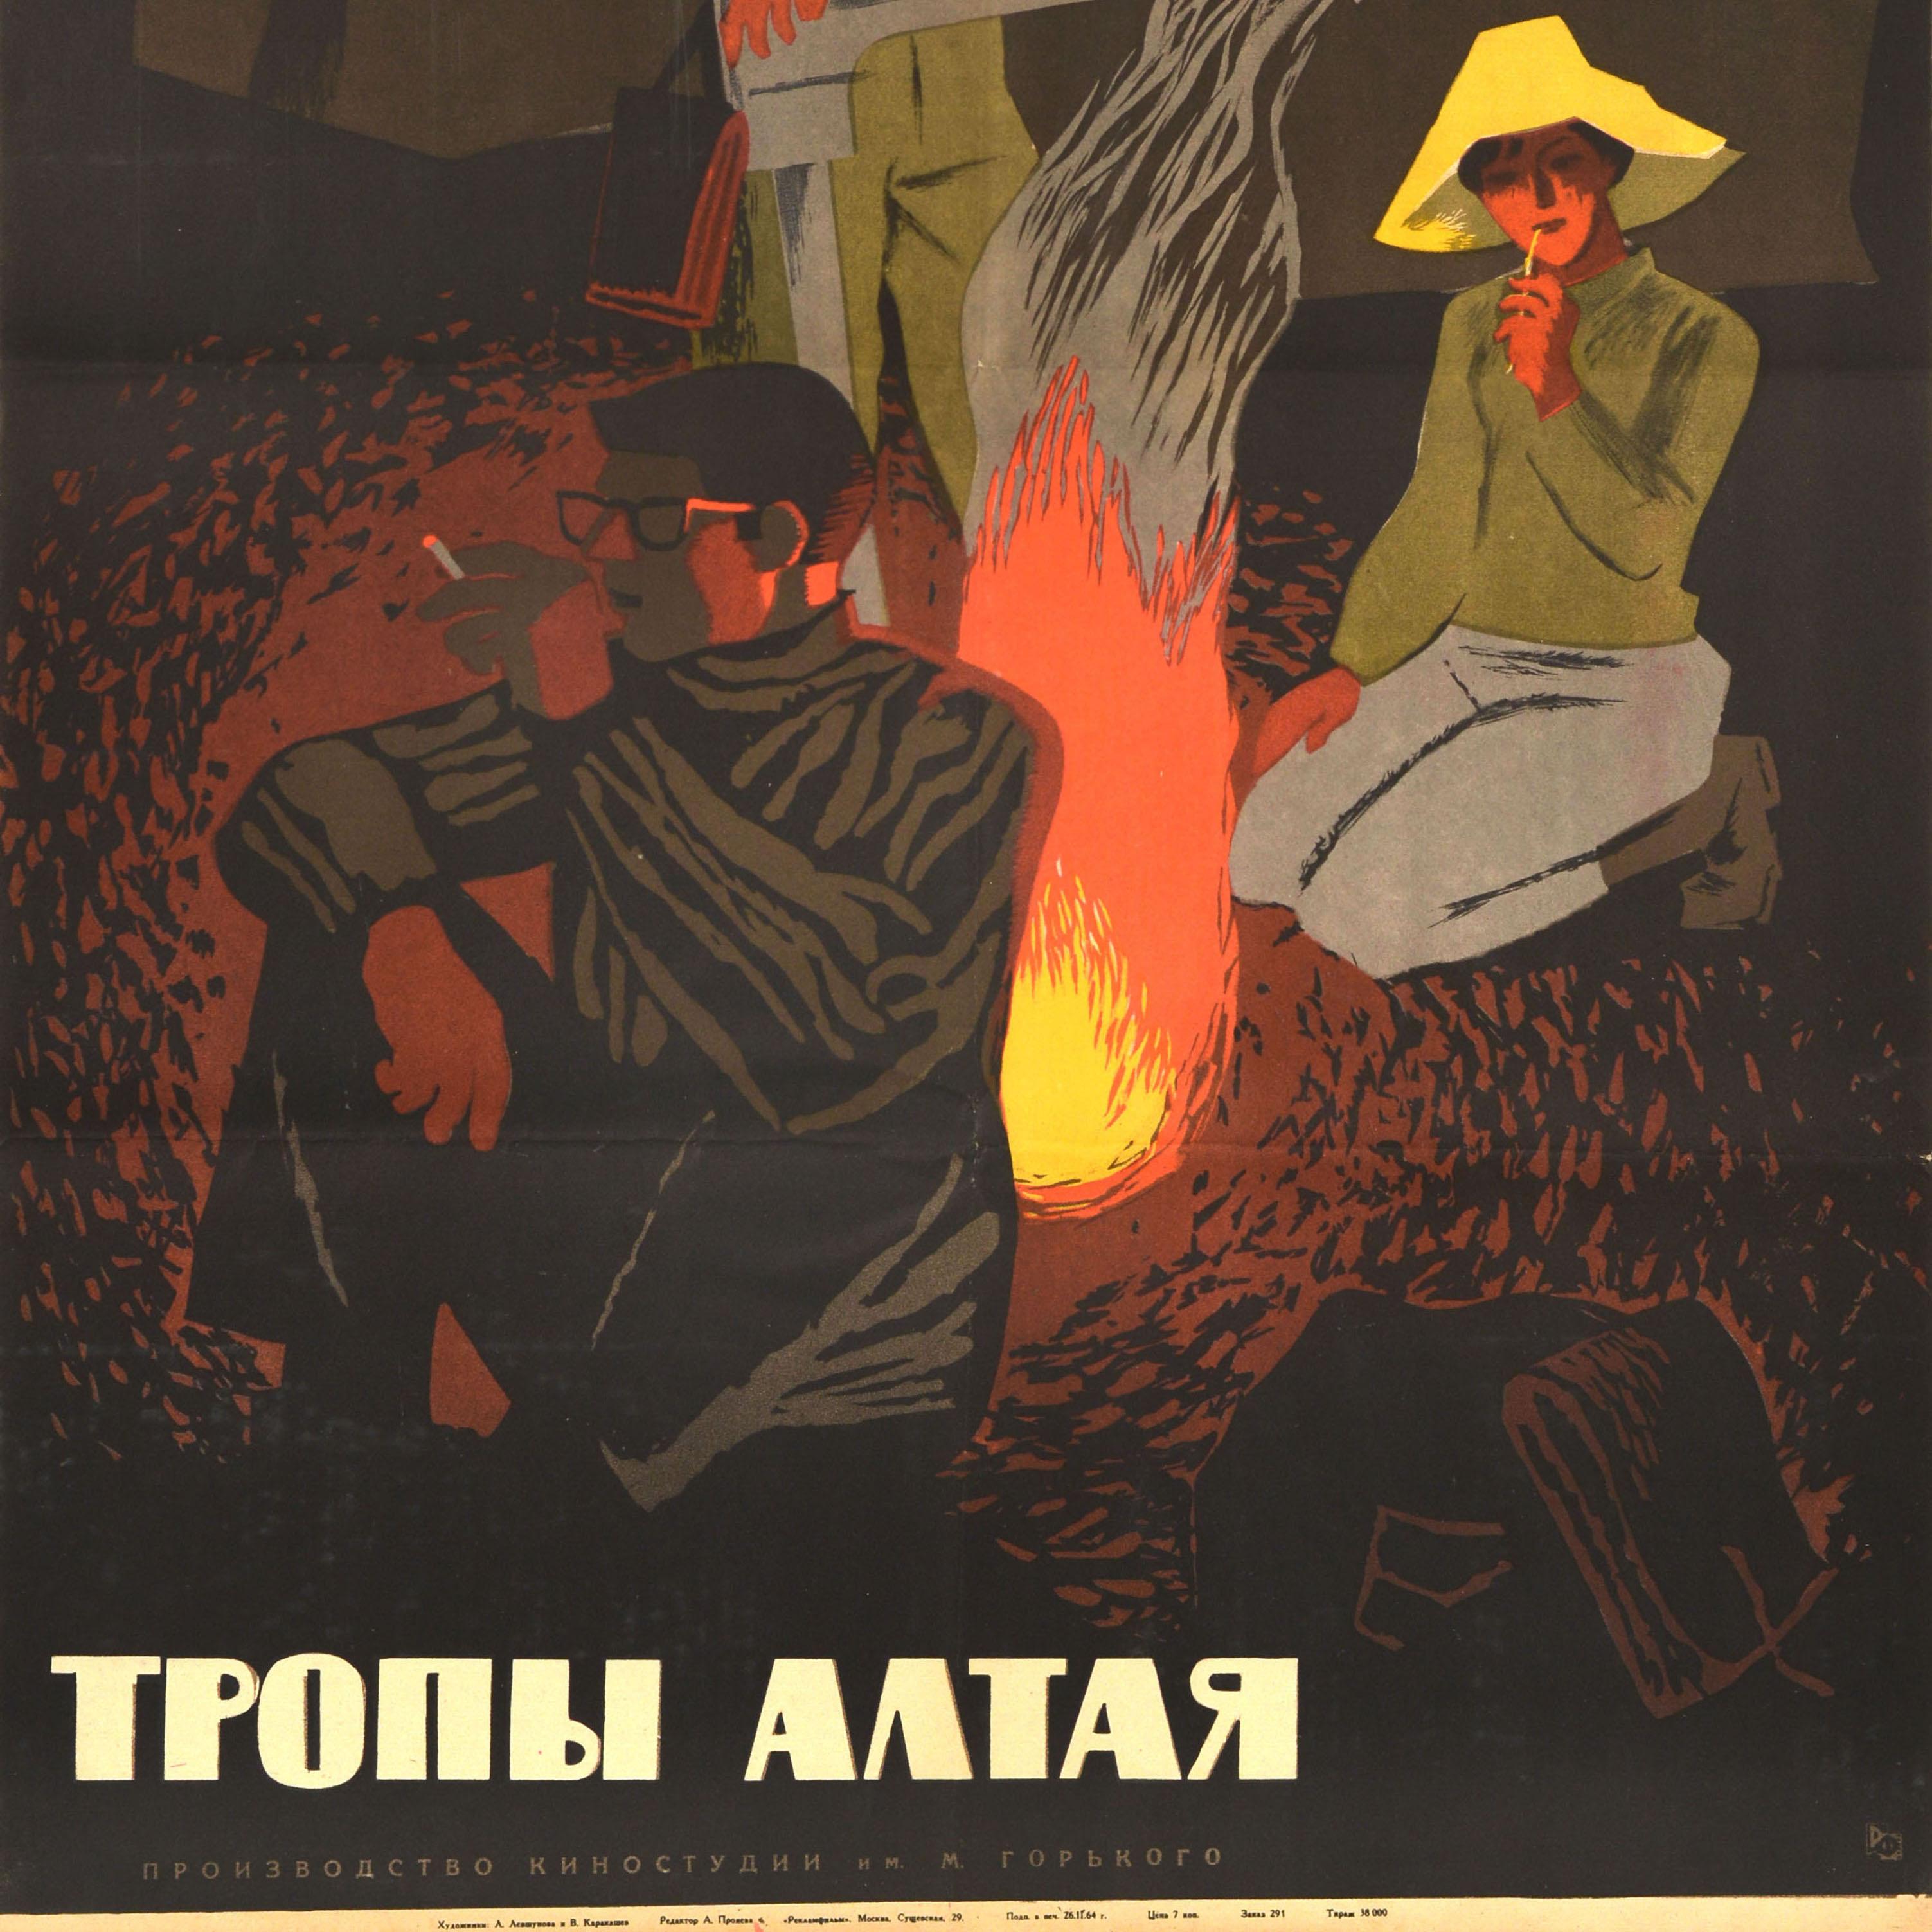 Original vintage movie poster for a 1963 Soviet adventure film - Тропы Алтая Paths of Altai - directed by Yuri Pobedonostsev and based on a novel of the same name by Sergei Zalygin. Great artwork showing three people sitting around a campsite fire